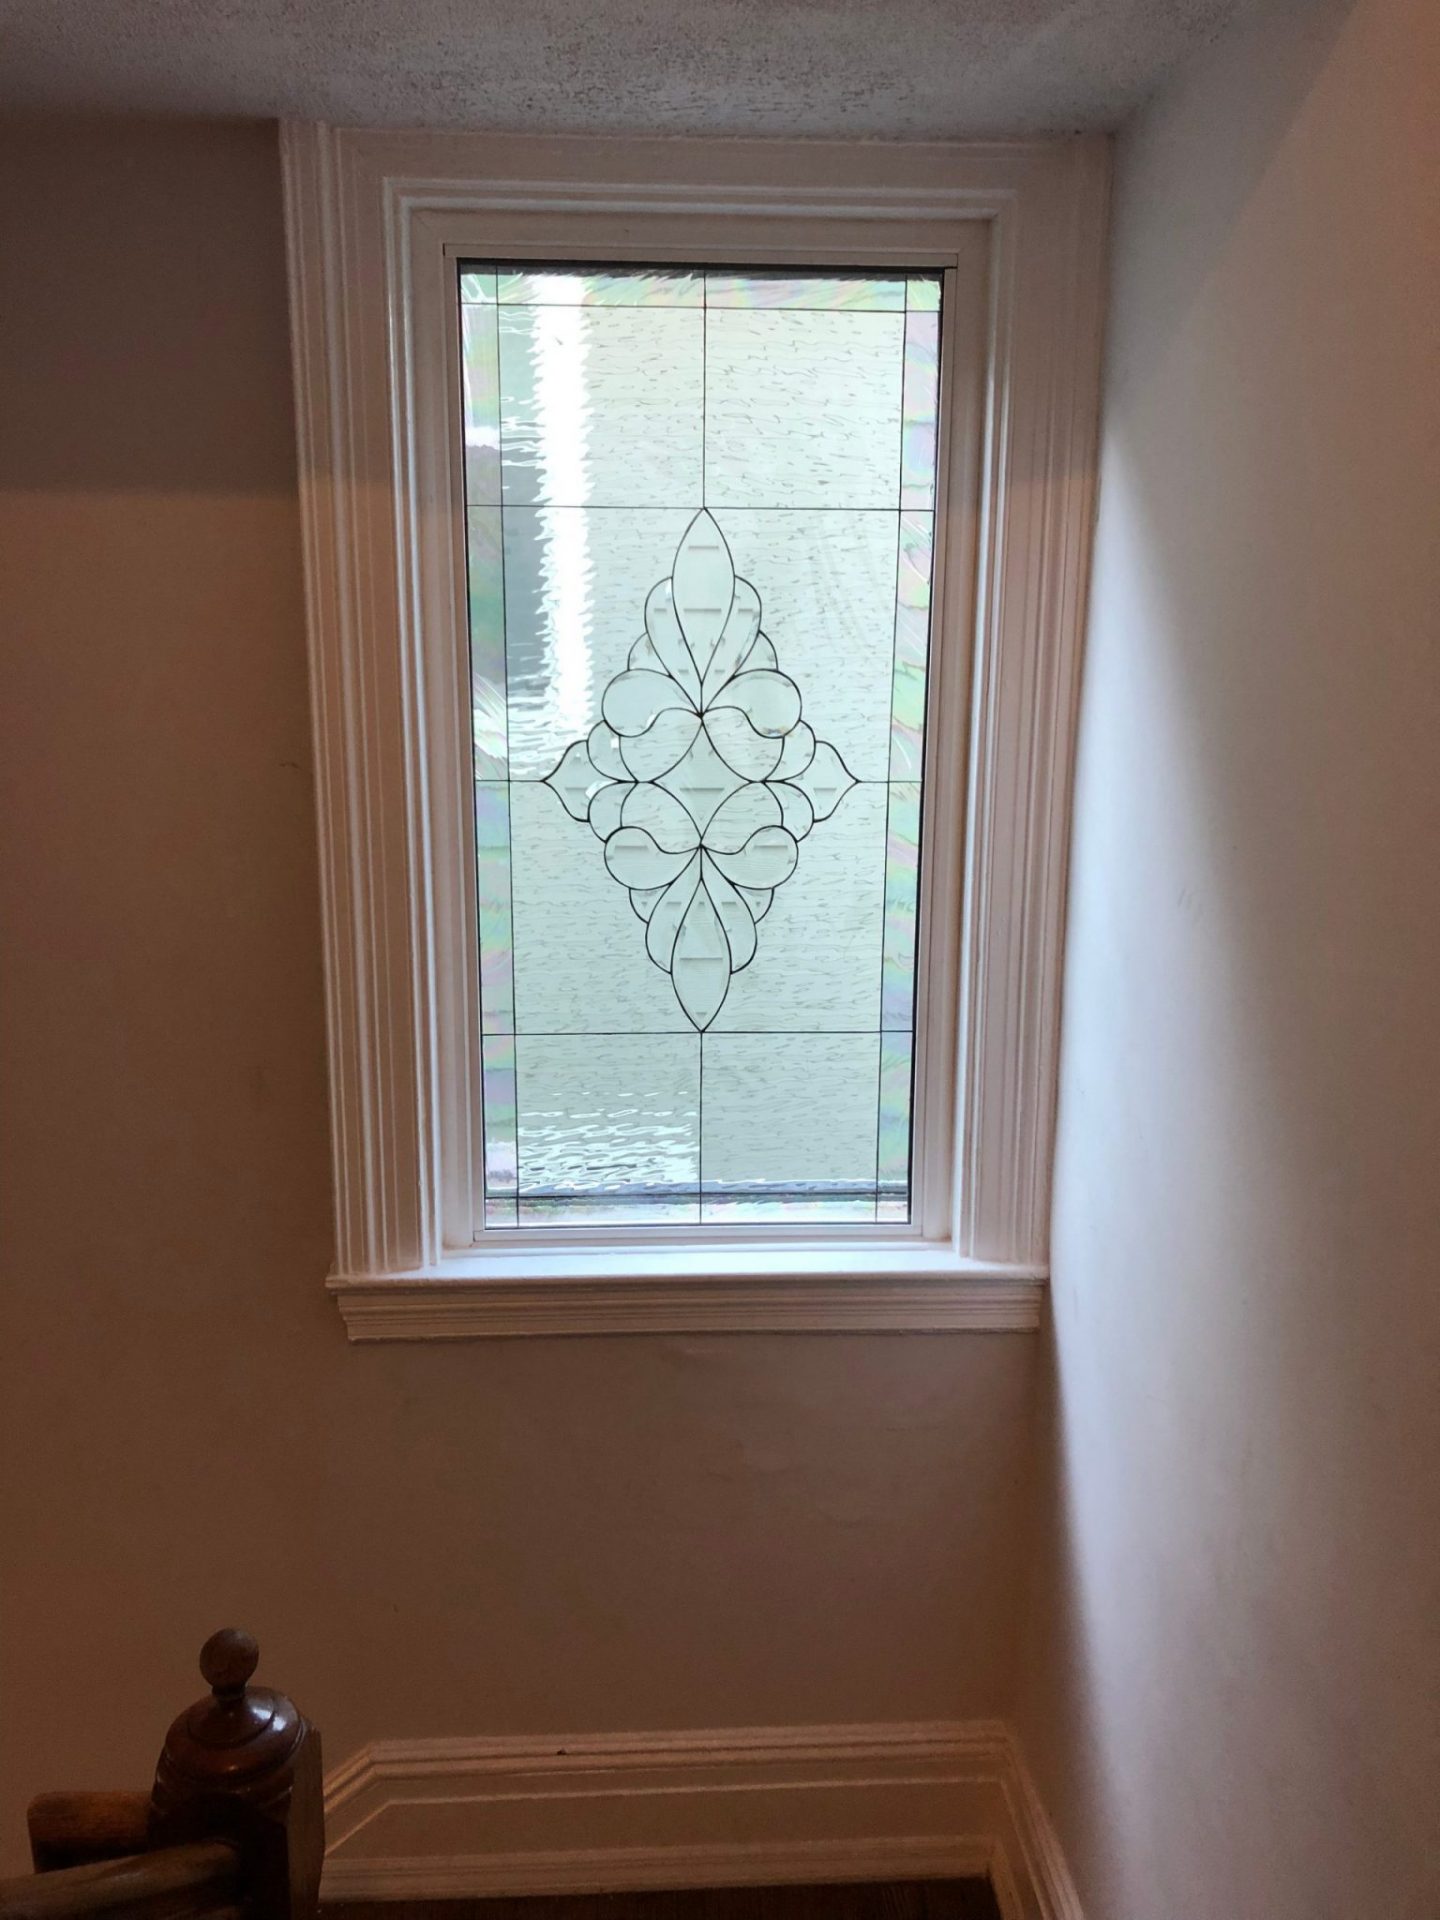 Lovely Stairway Beveled Glass Window With An Iridescent Border